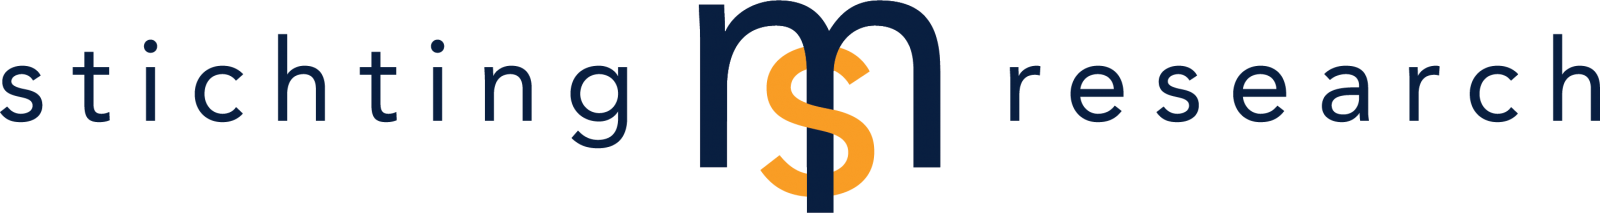 Stichting MS research logo